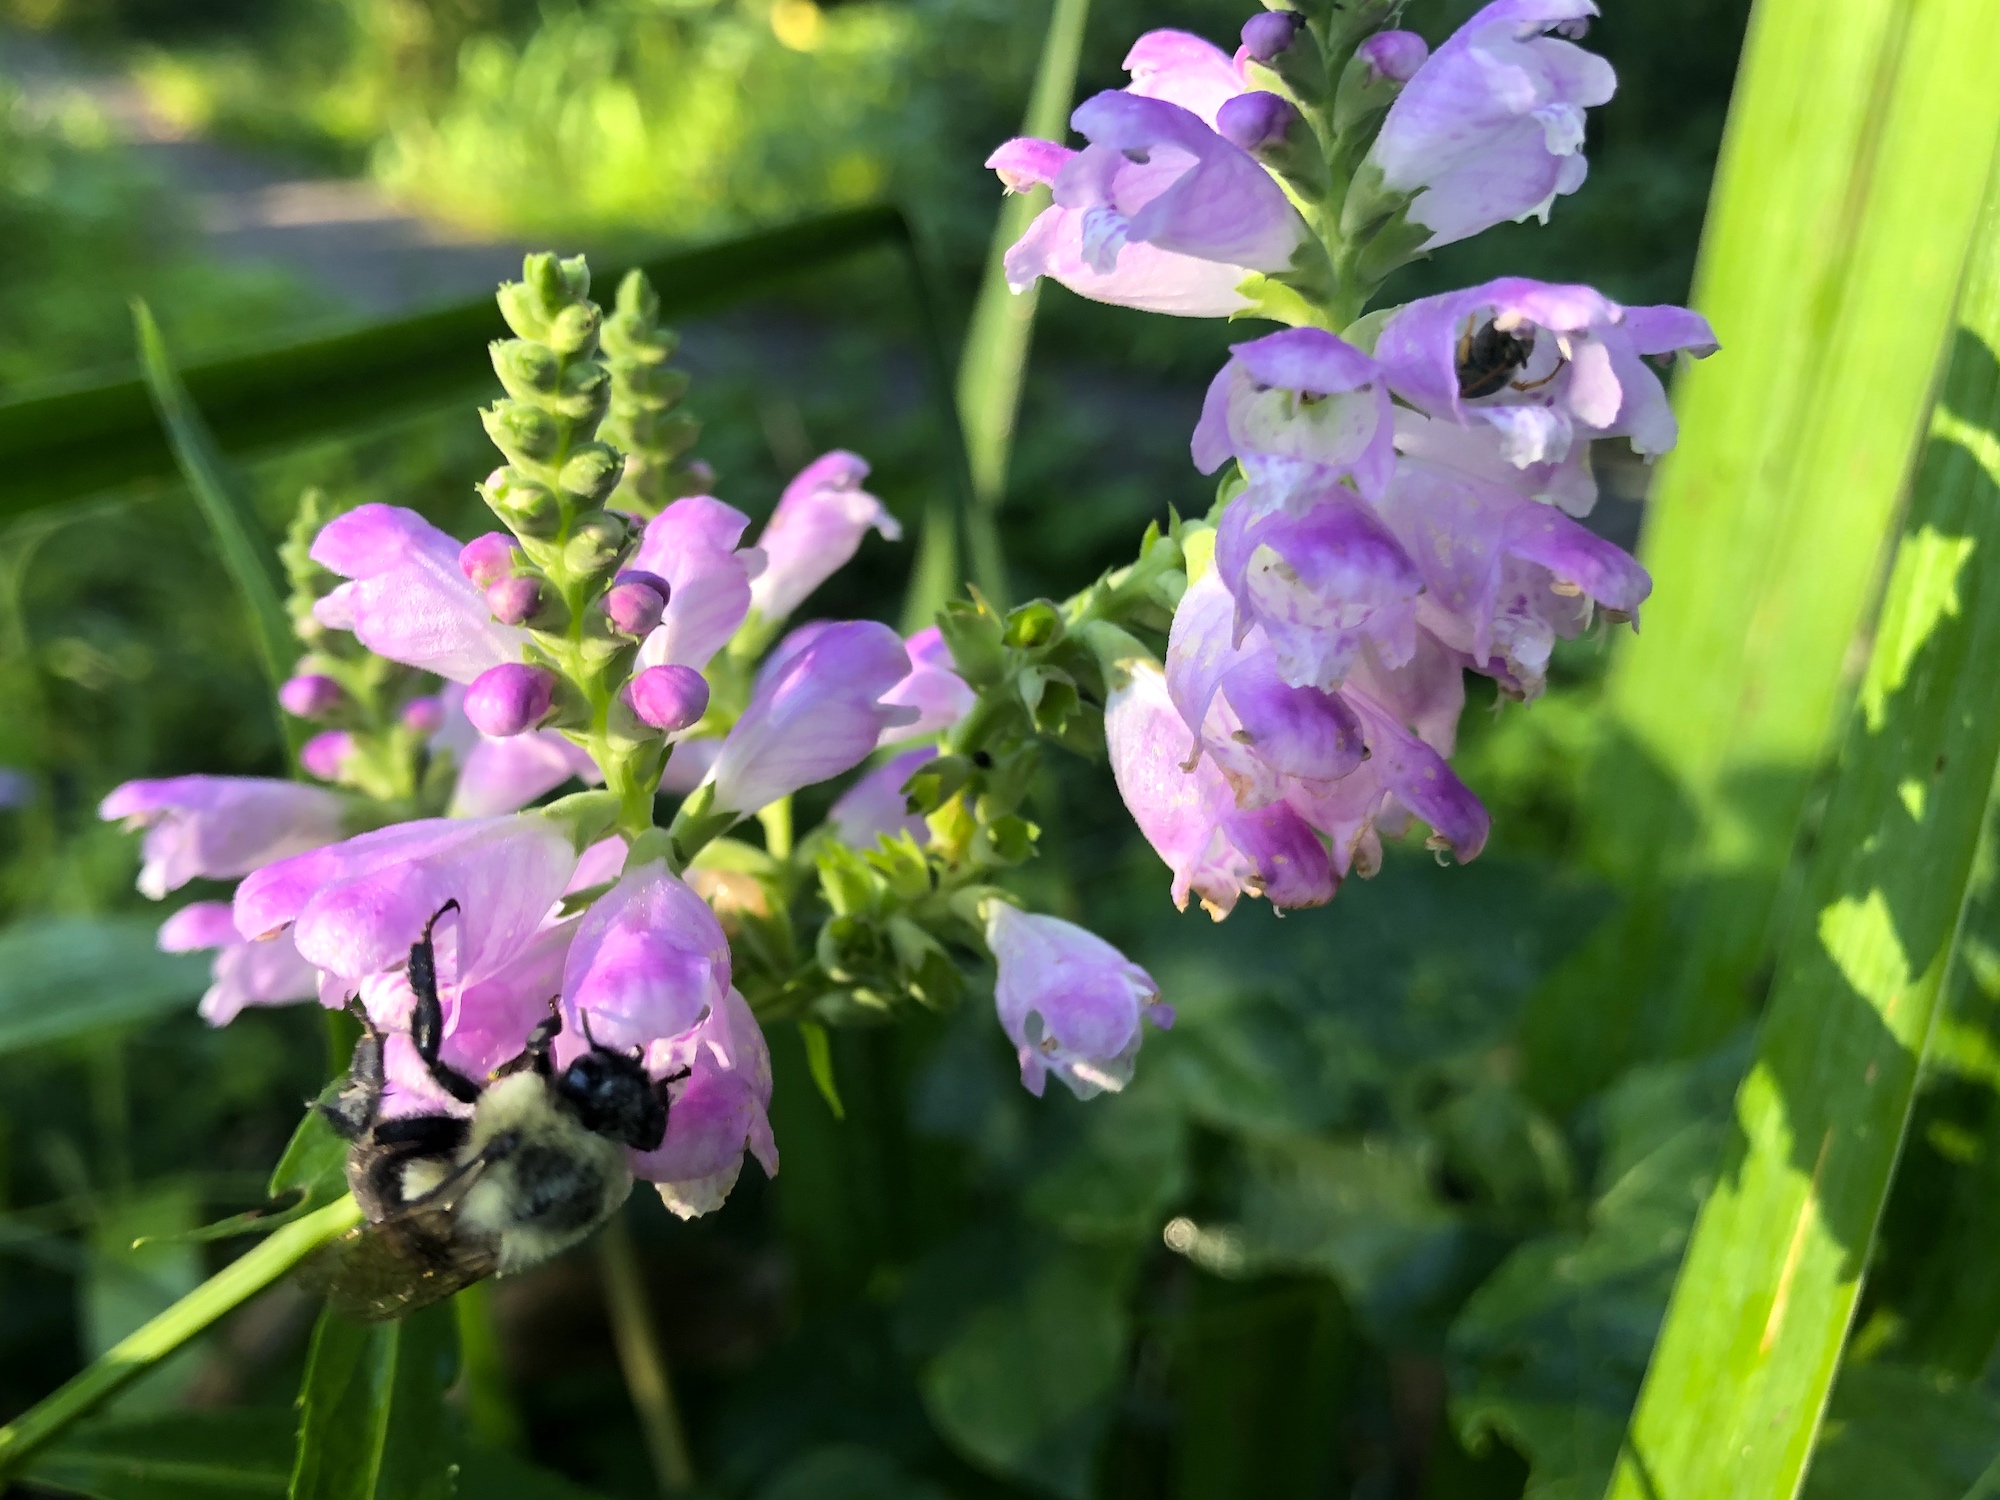 Bumblebee on Obedient Plant on August 12, 202.